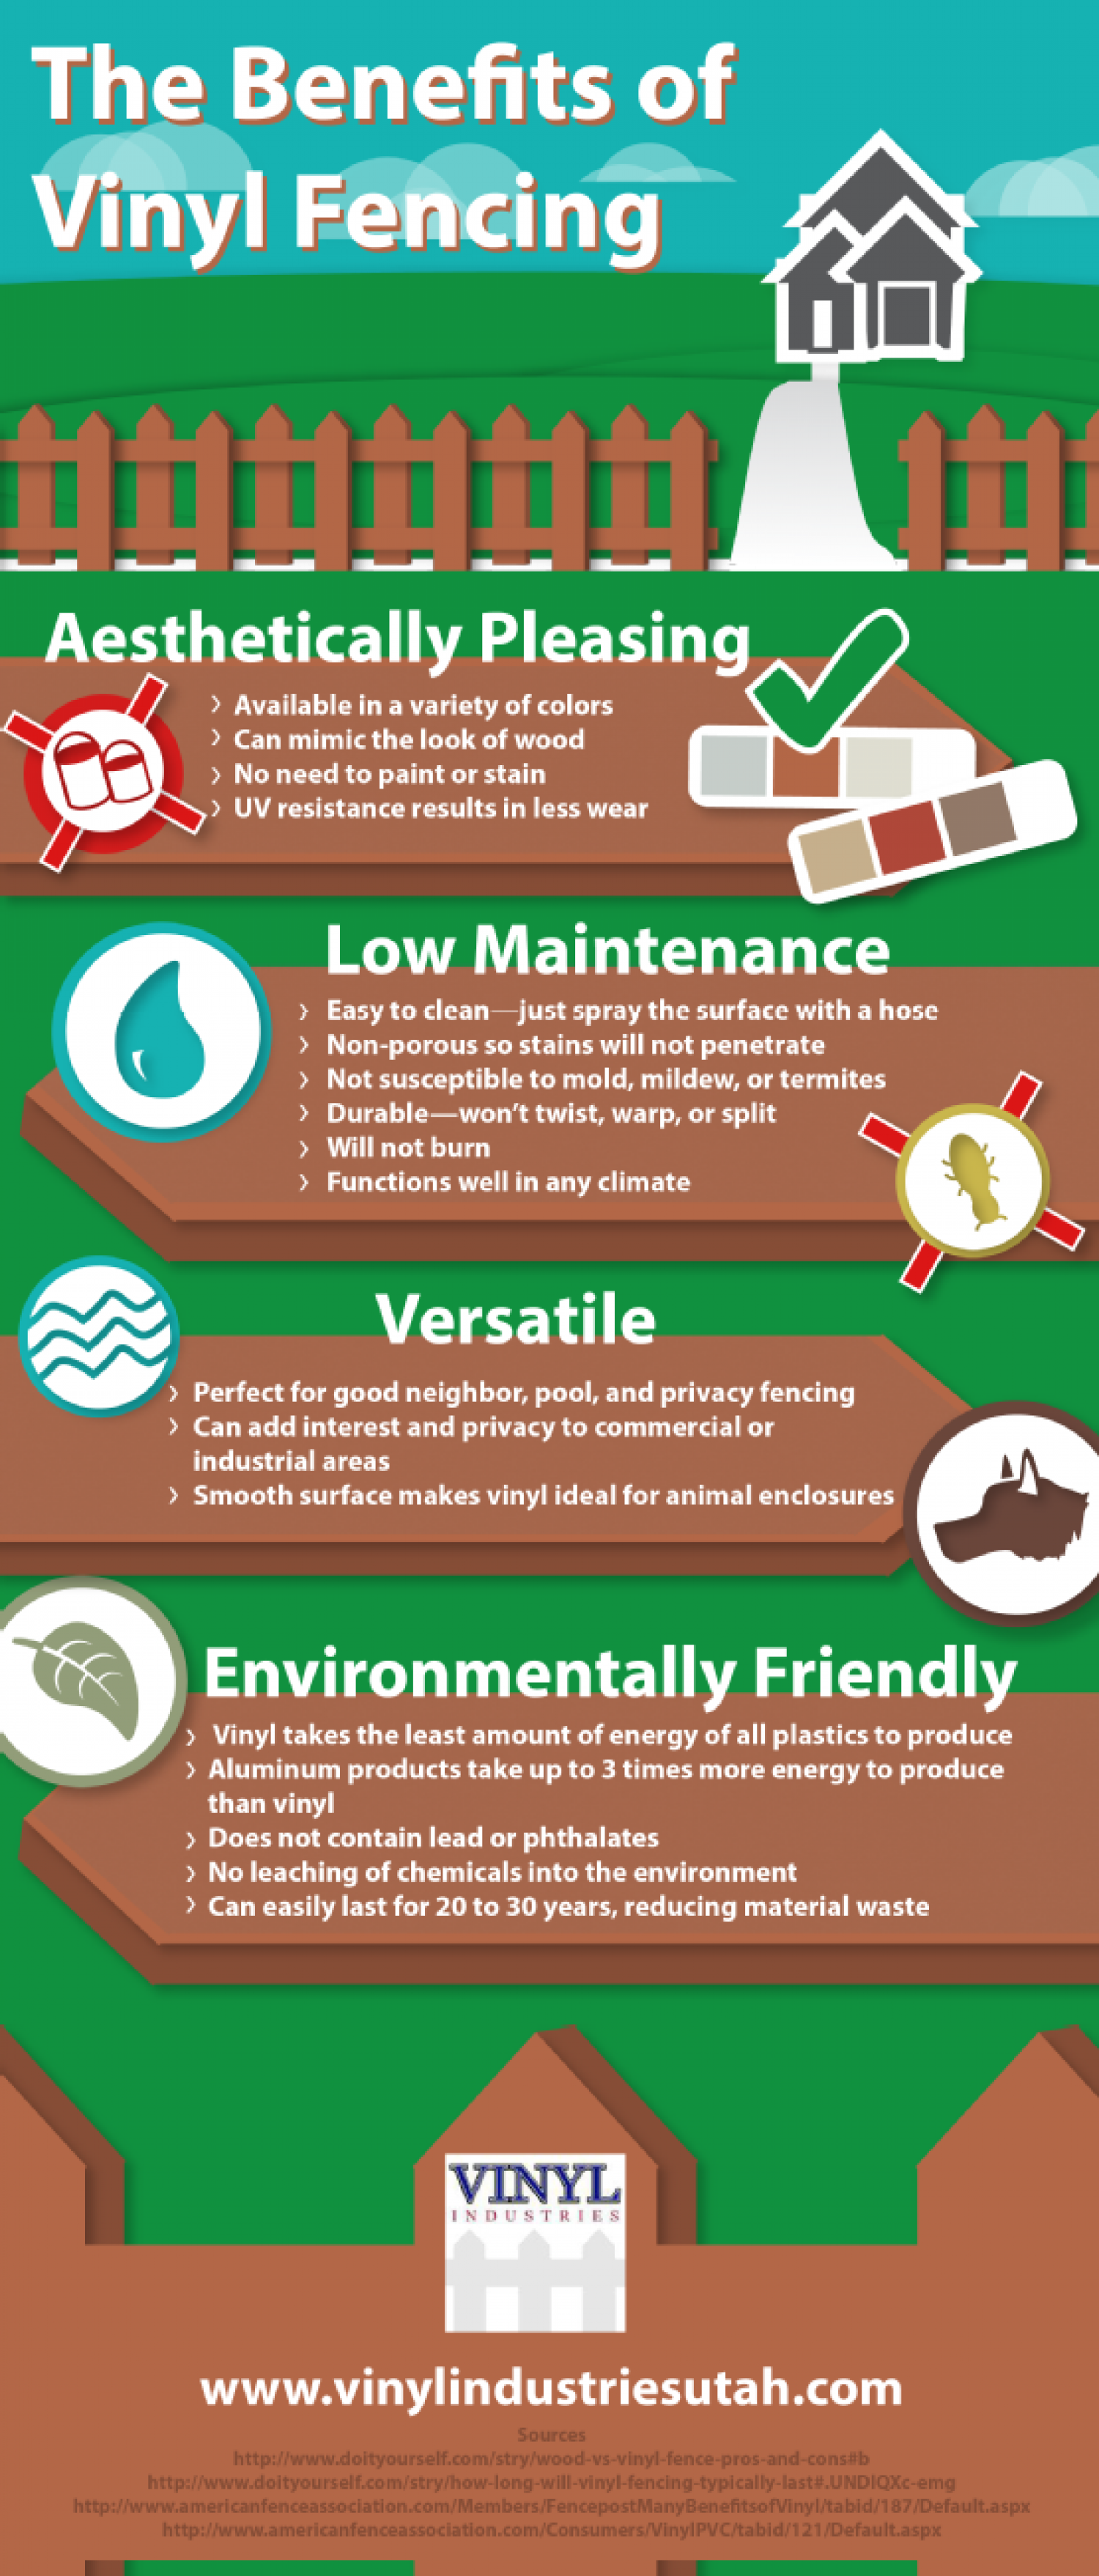 The Benefits of Vinyl Fencing Infographic